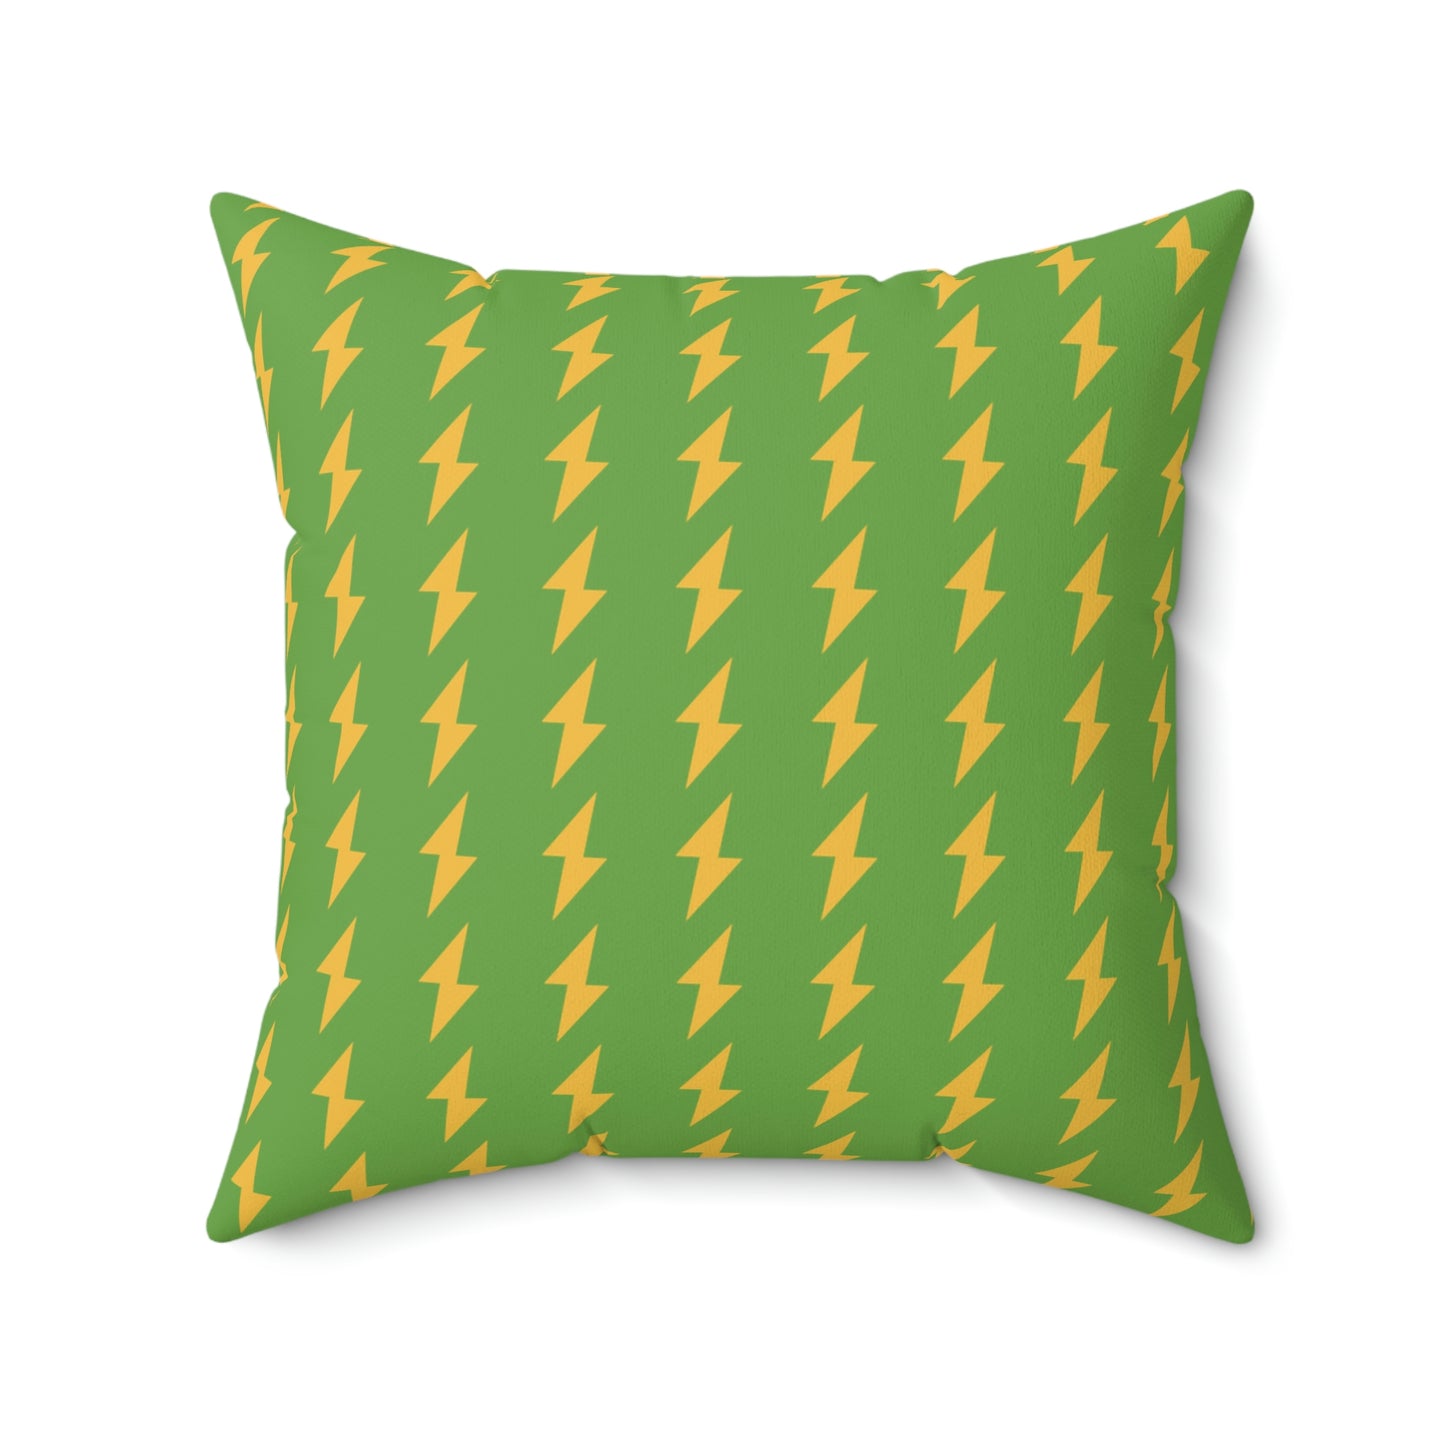 Spun Polyester Square Pillow Case “Electric Bolt on Green”